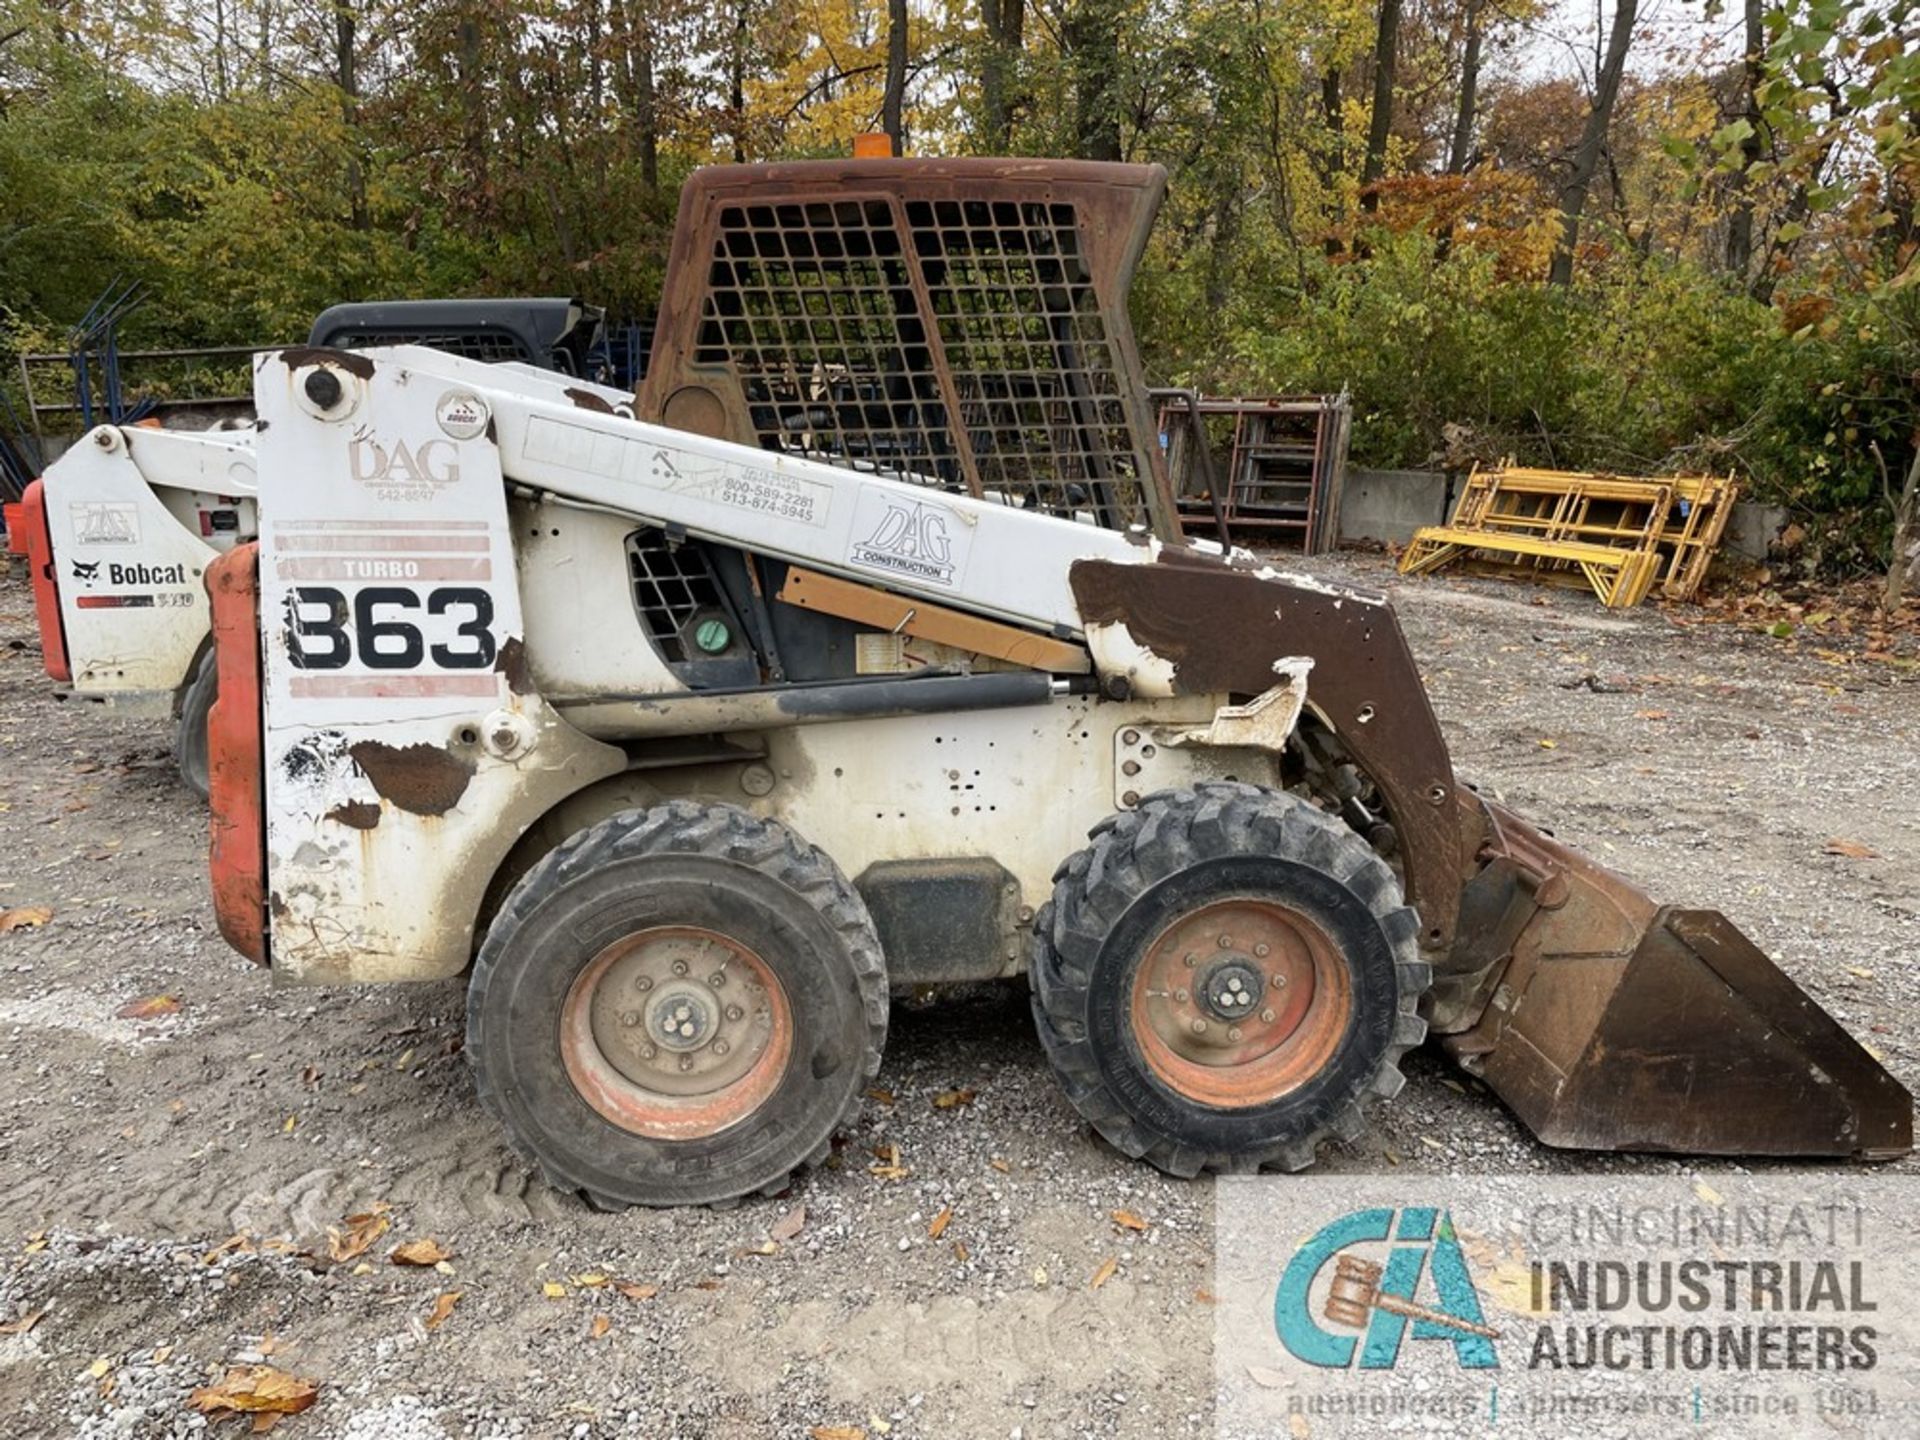 BOBCAT MODEL 863 TURBO COMPACT SKID STEER LOADER; ID # 514444641, 4,024 HOURS SHOWING, 72" BUCKET - Image 6 of 9